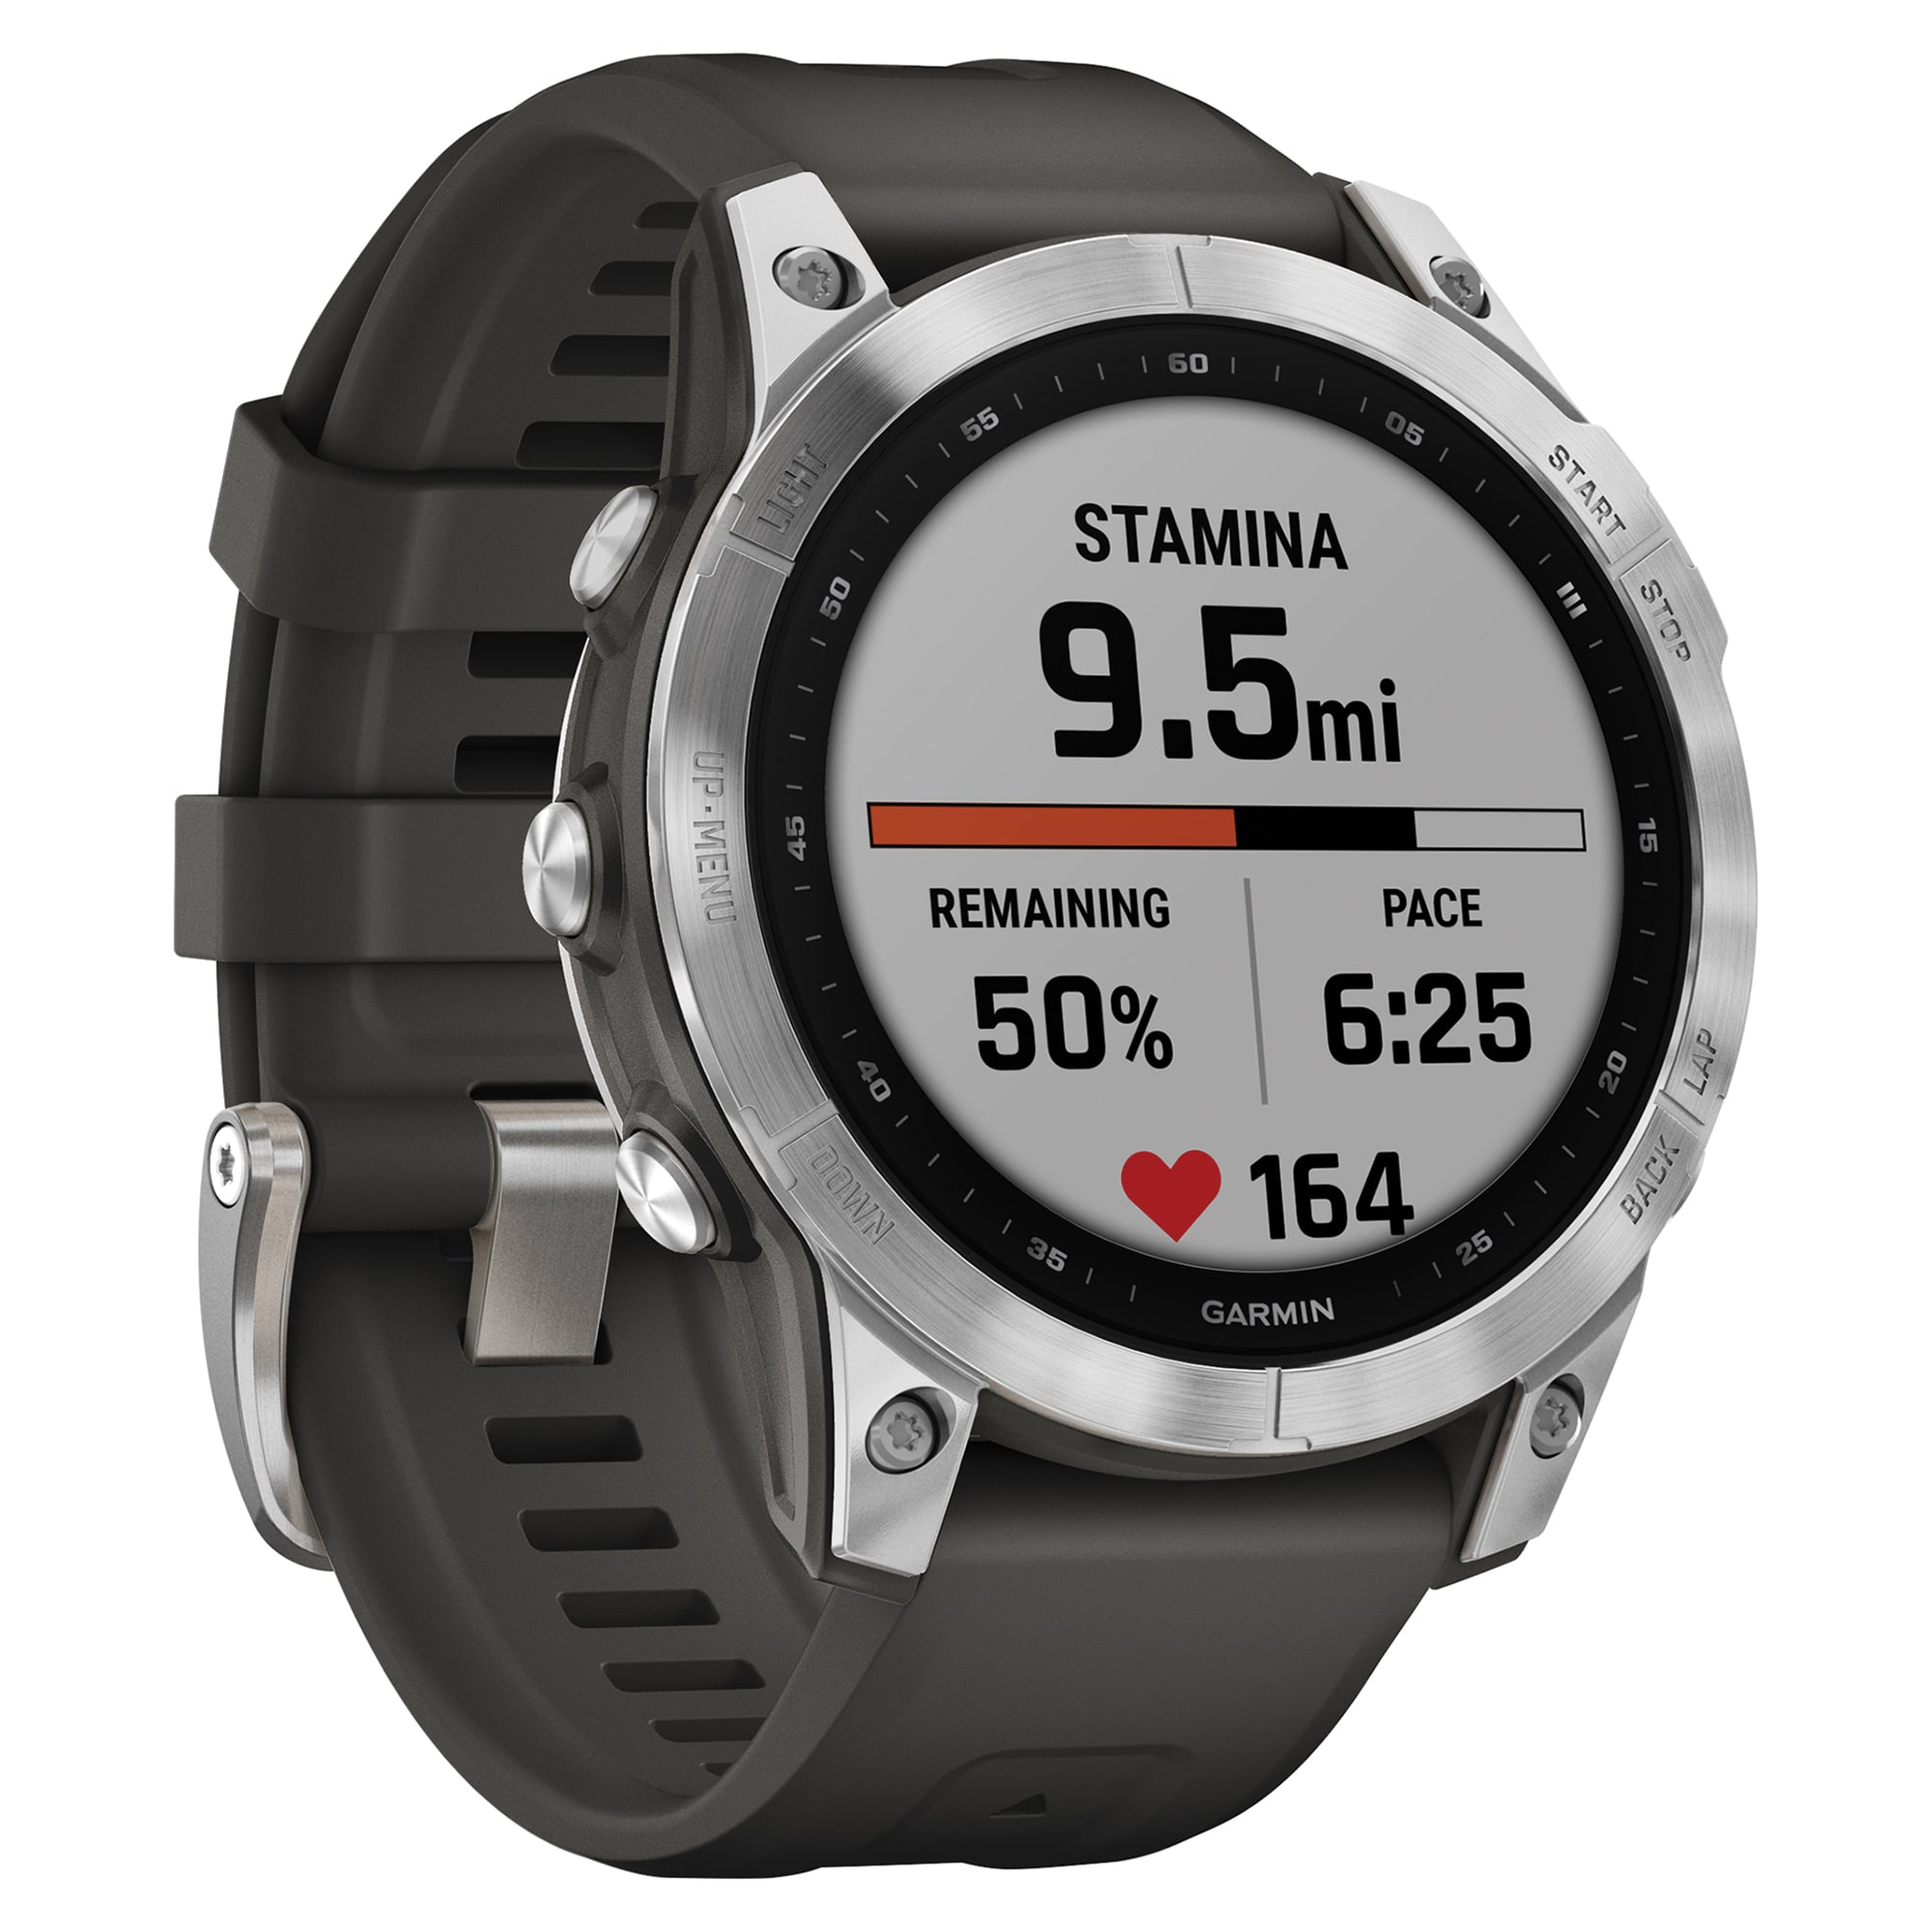 Garmin fenix Monitor Step Rate Watch Trackers in Fitness 7 the with and department Smart Gps at Enabled Heart Counter